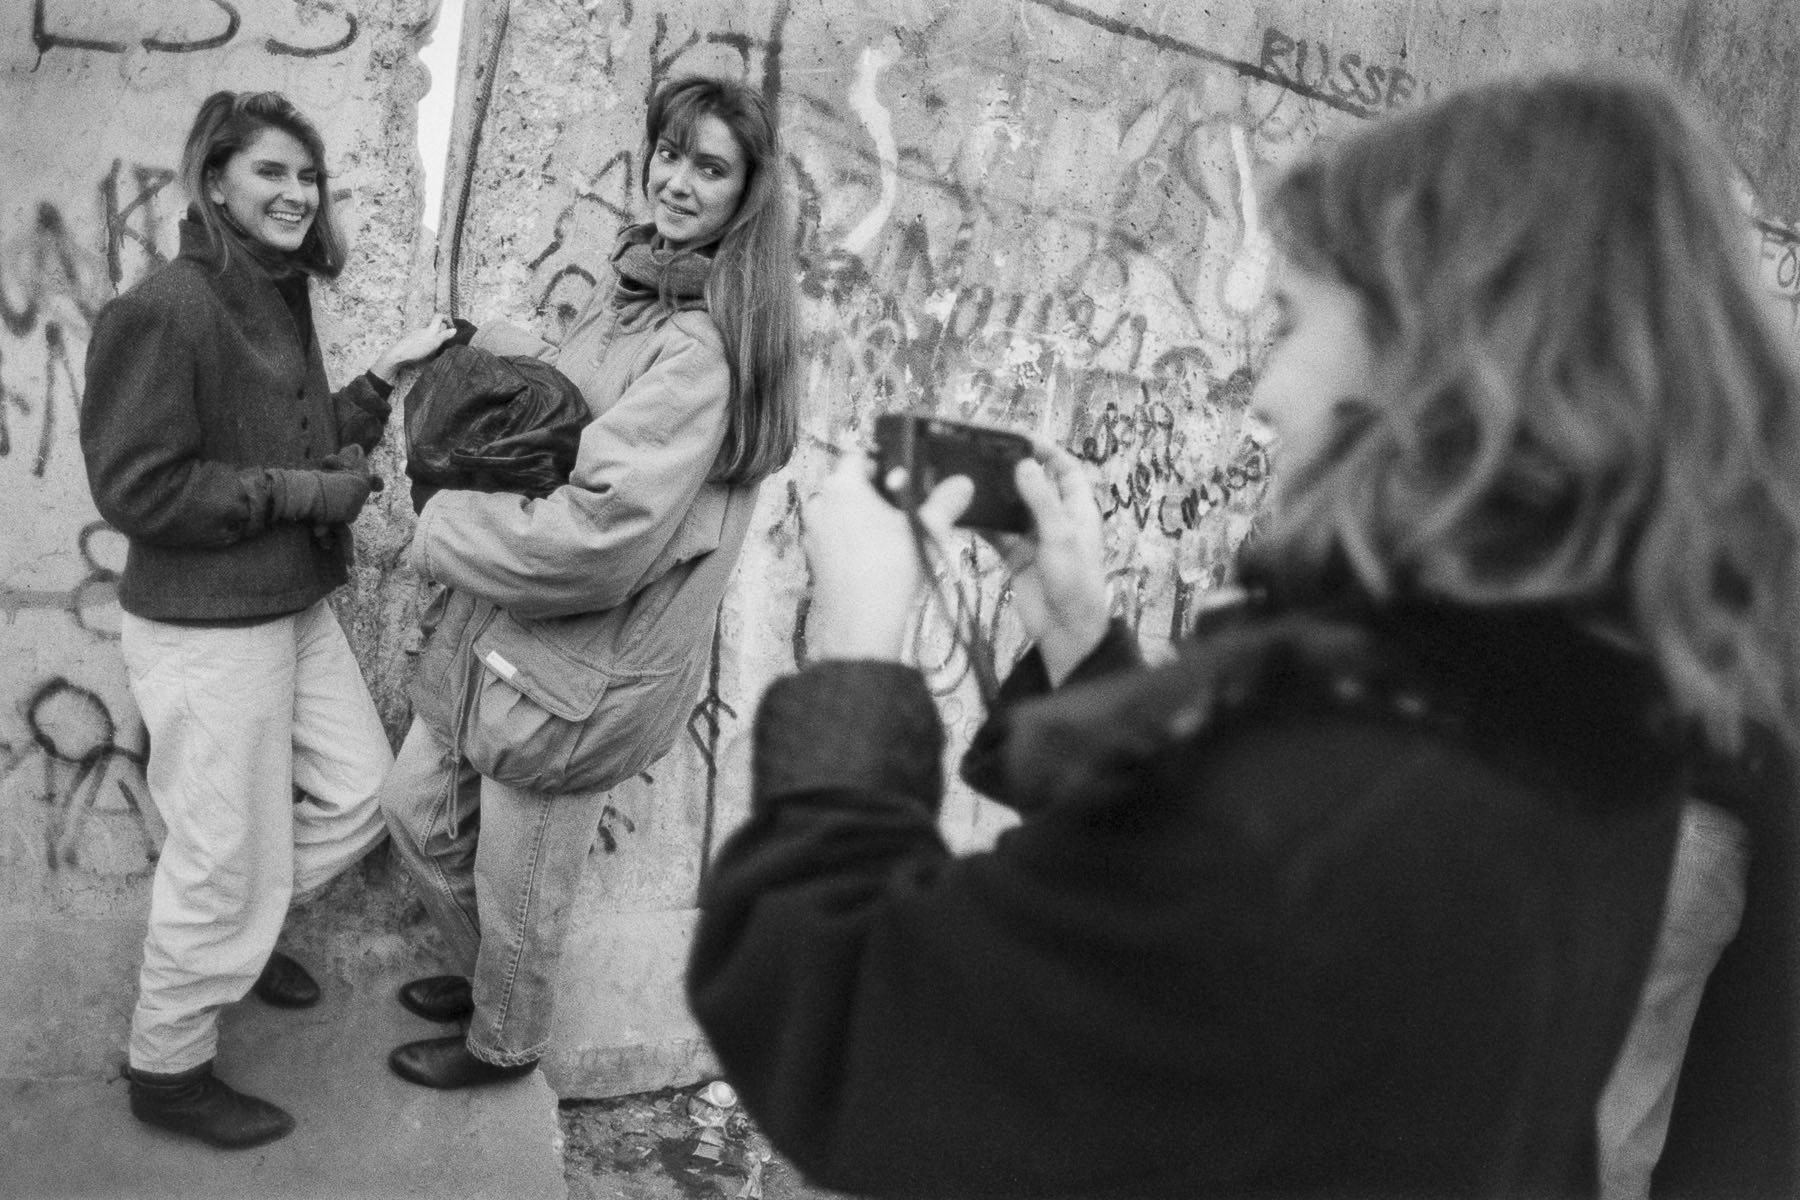 West Berliner women pose for photos in front of a gap in the Berlin Wall on November 11, 1989